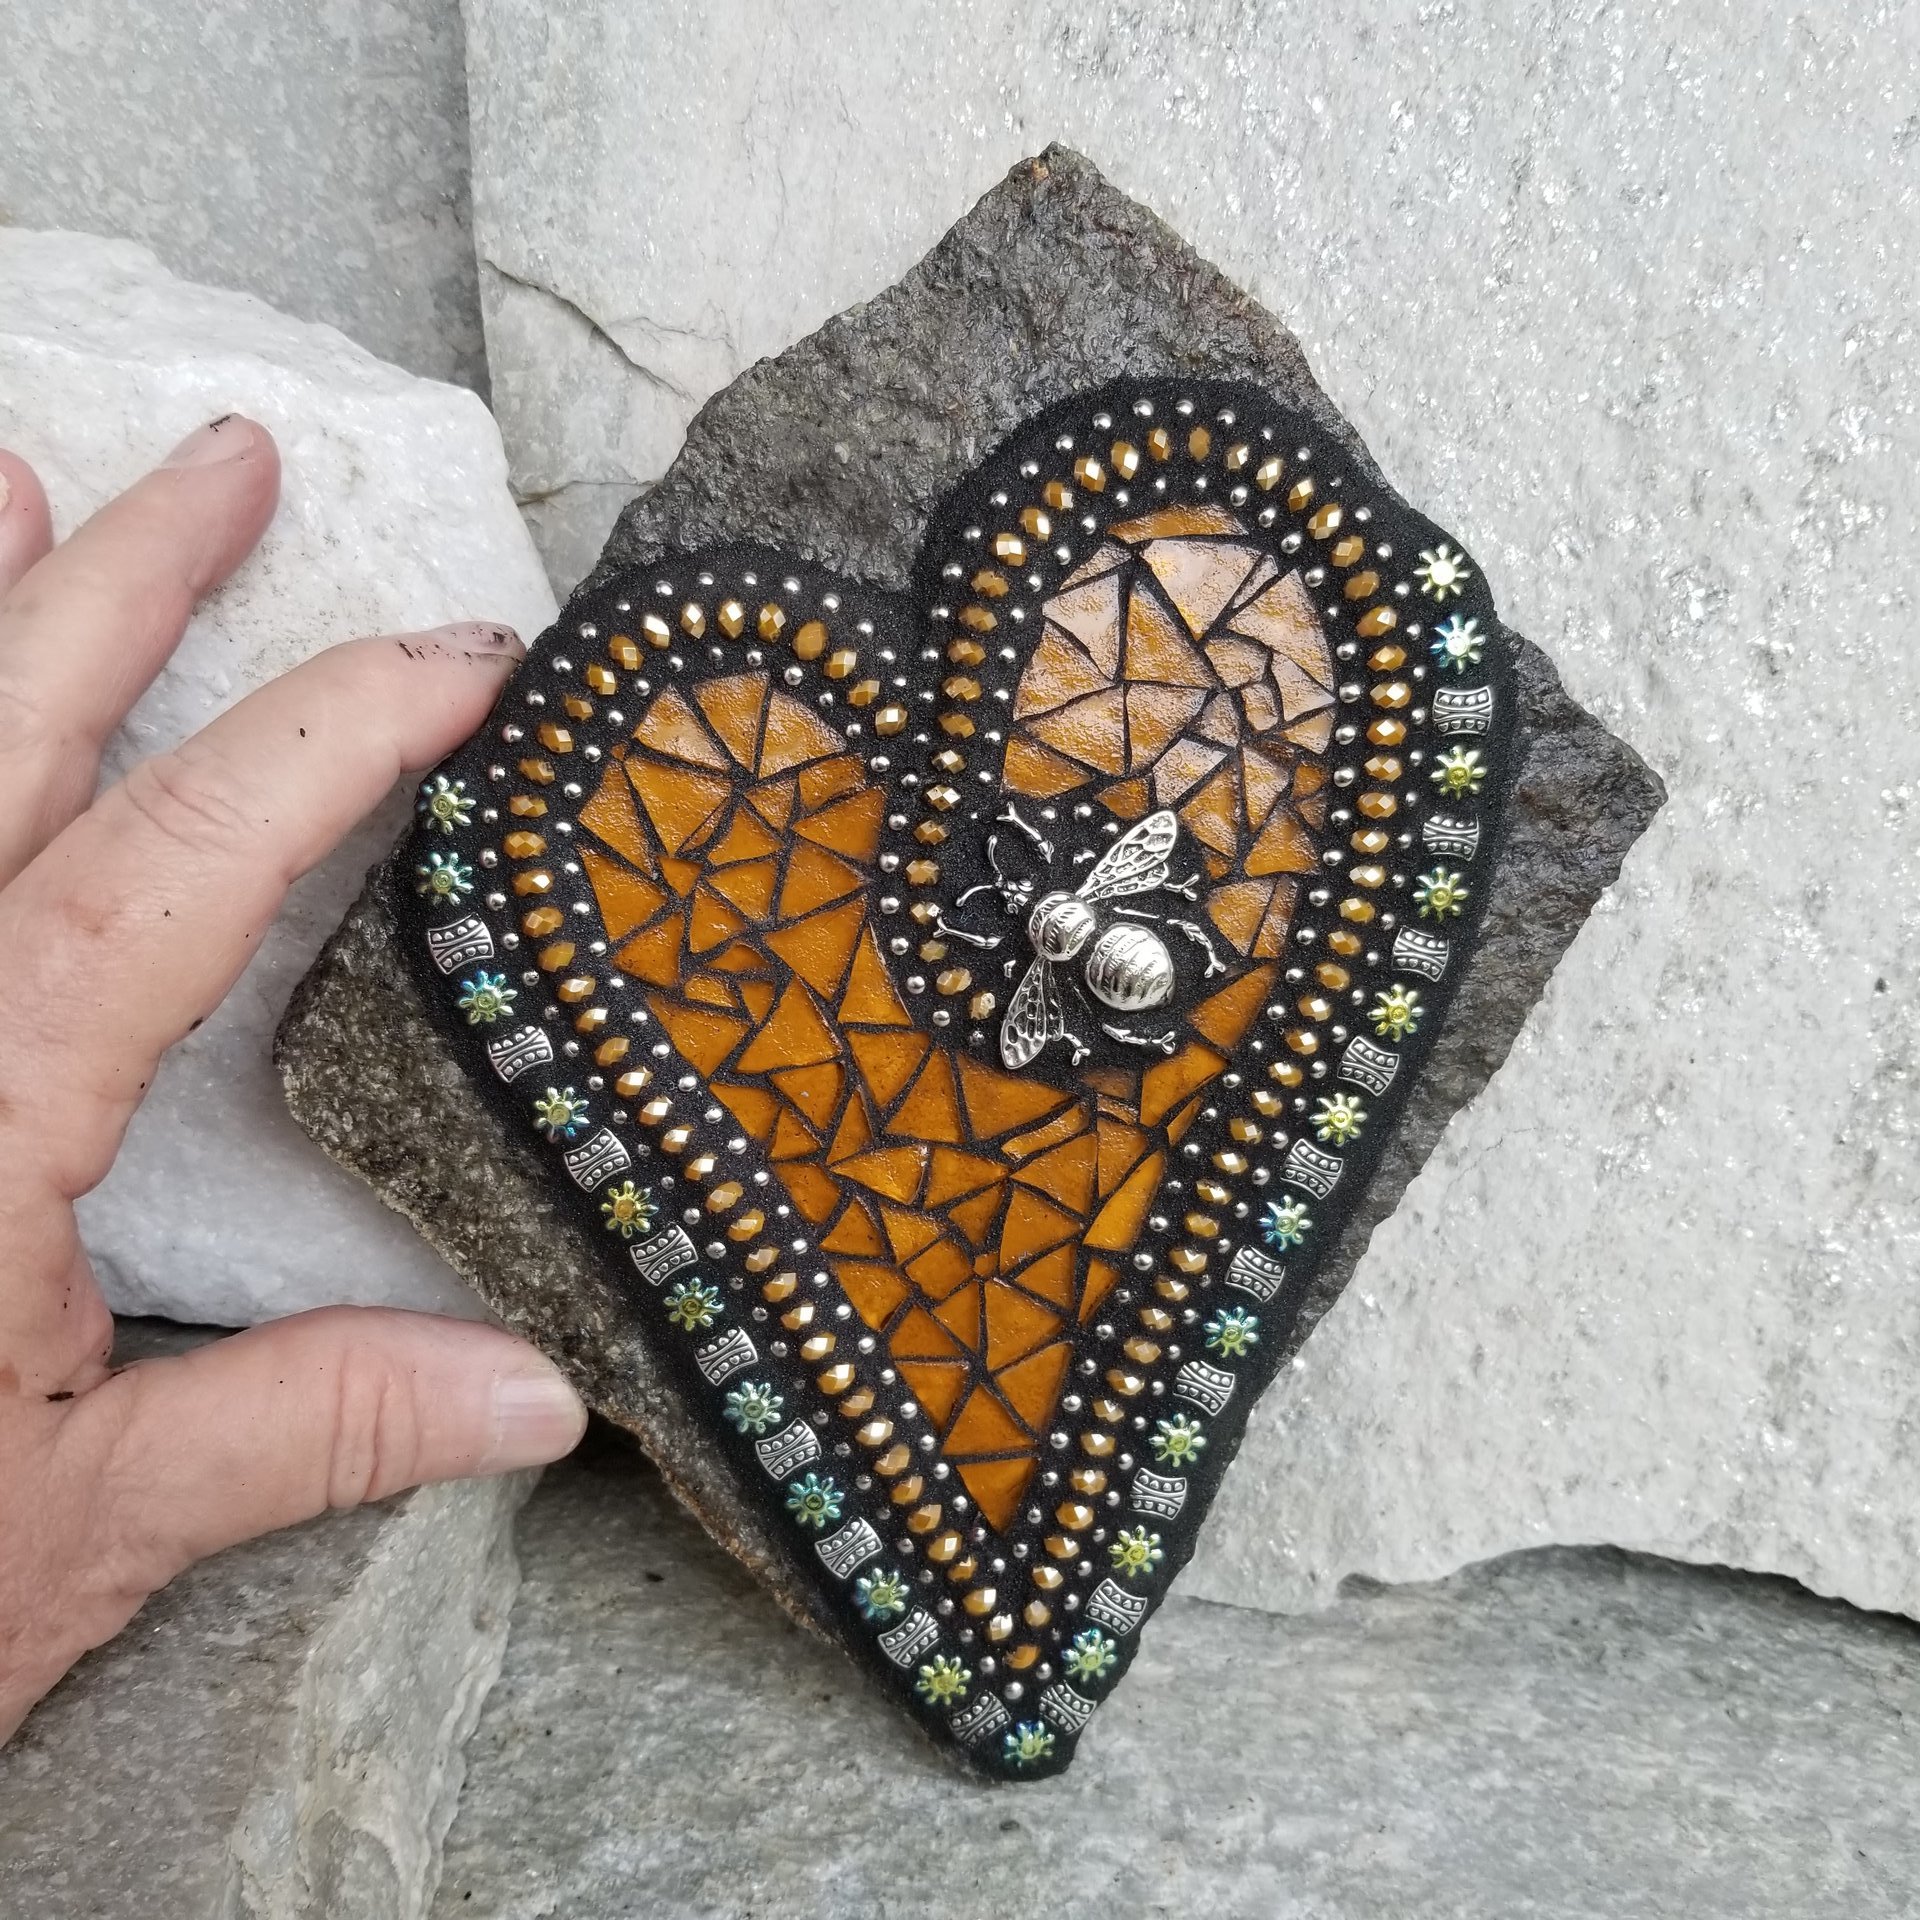 Amber Mosaic Heart Garden Stone with Bee